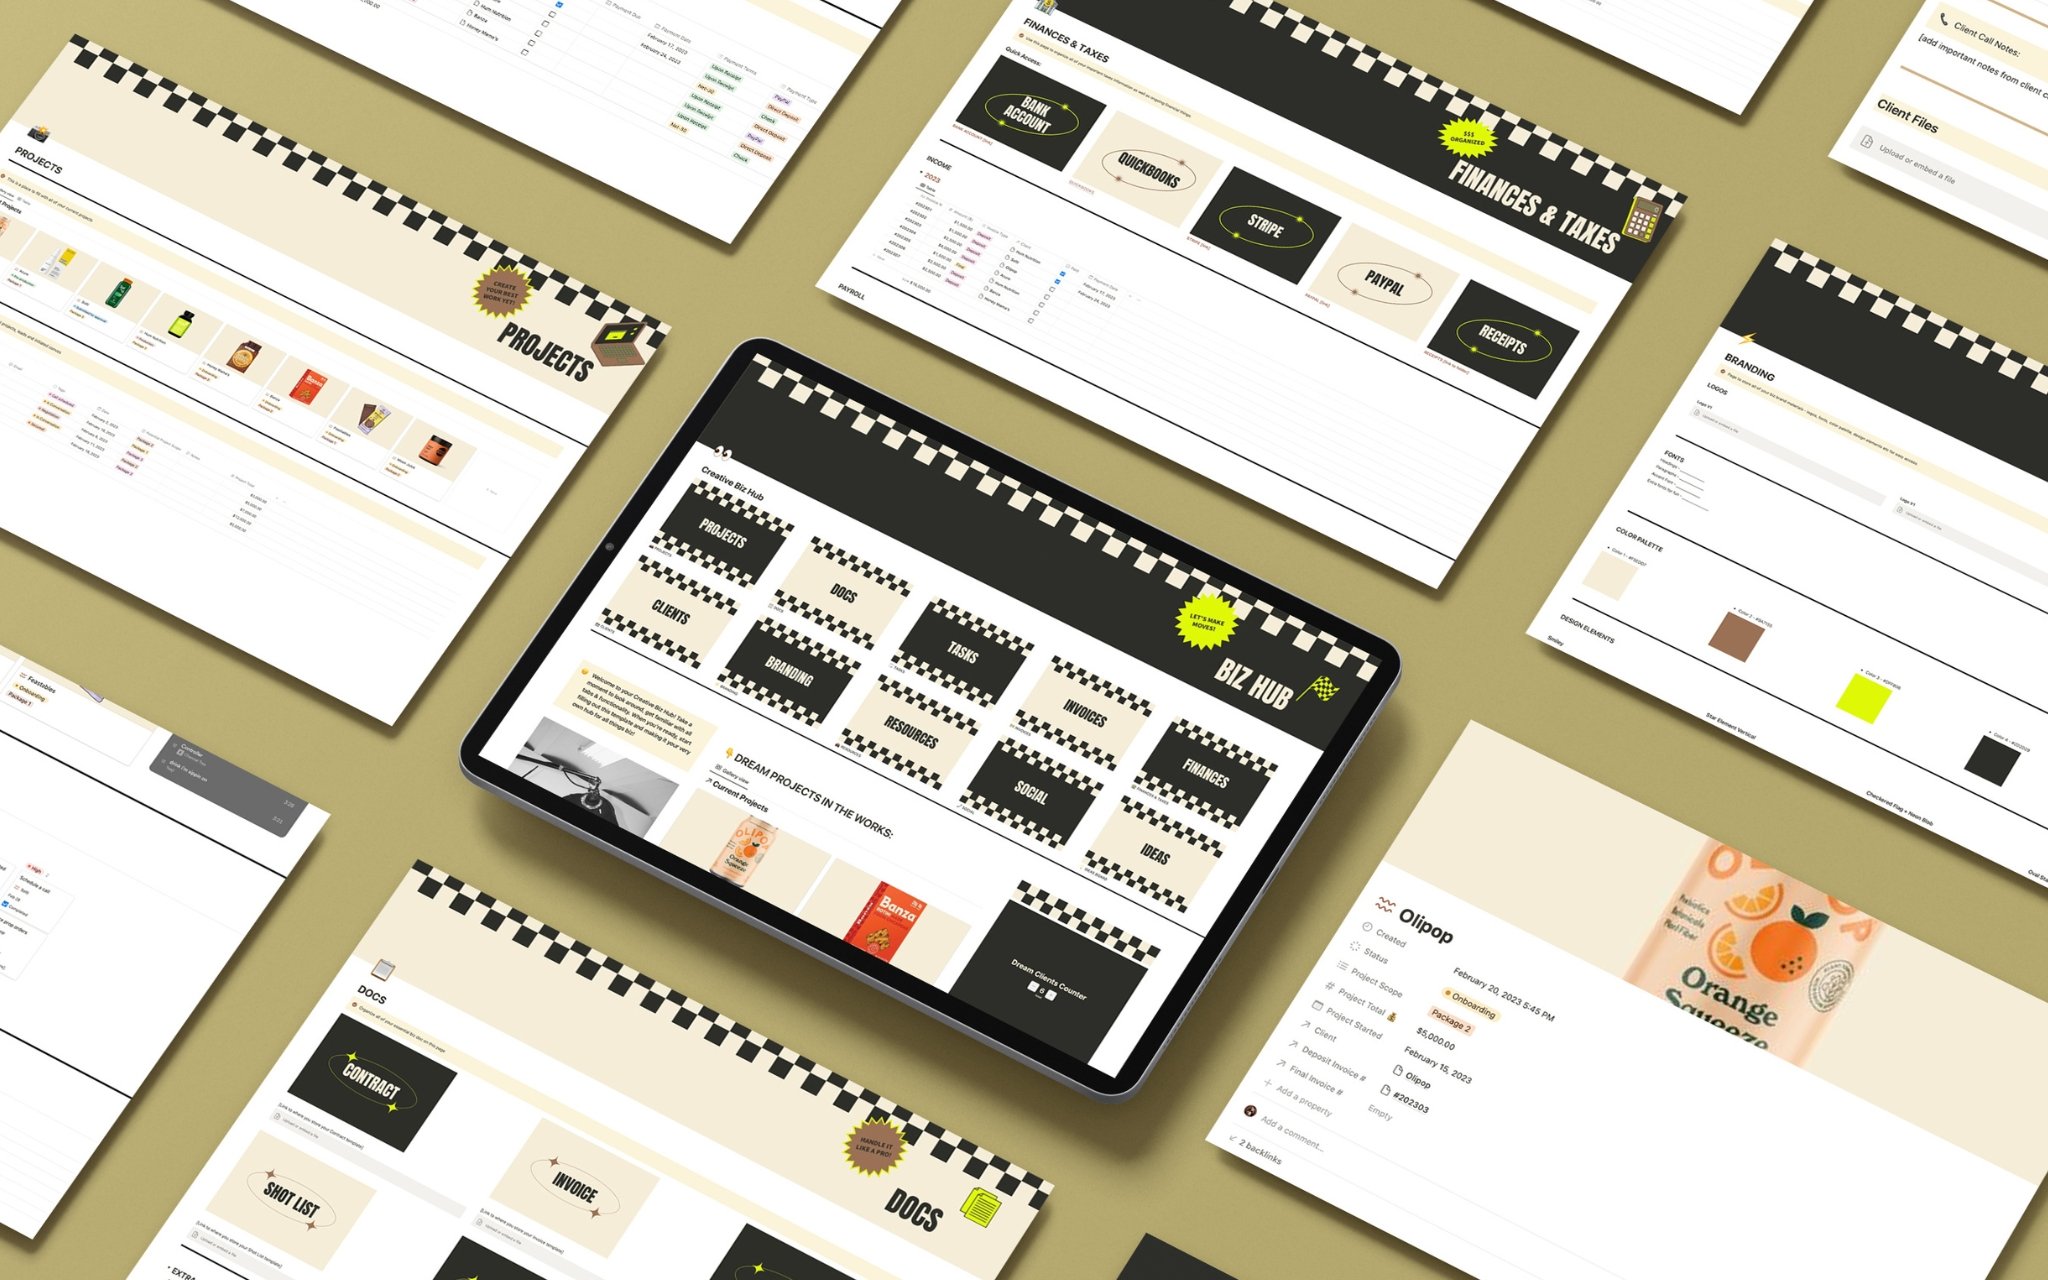 All things creative business under one digital roof - organized, categorized and systemized!